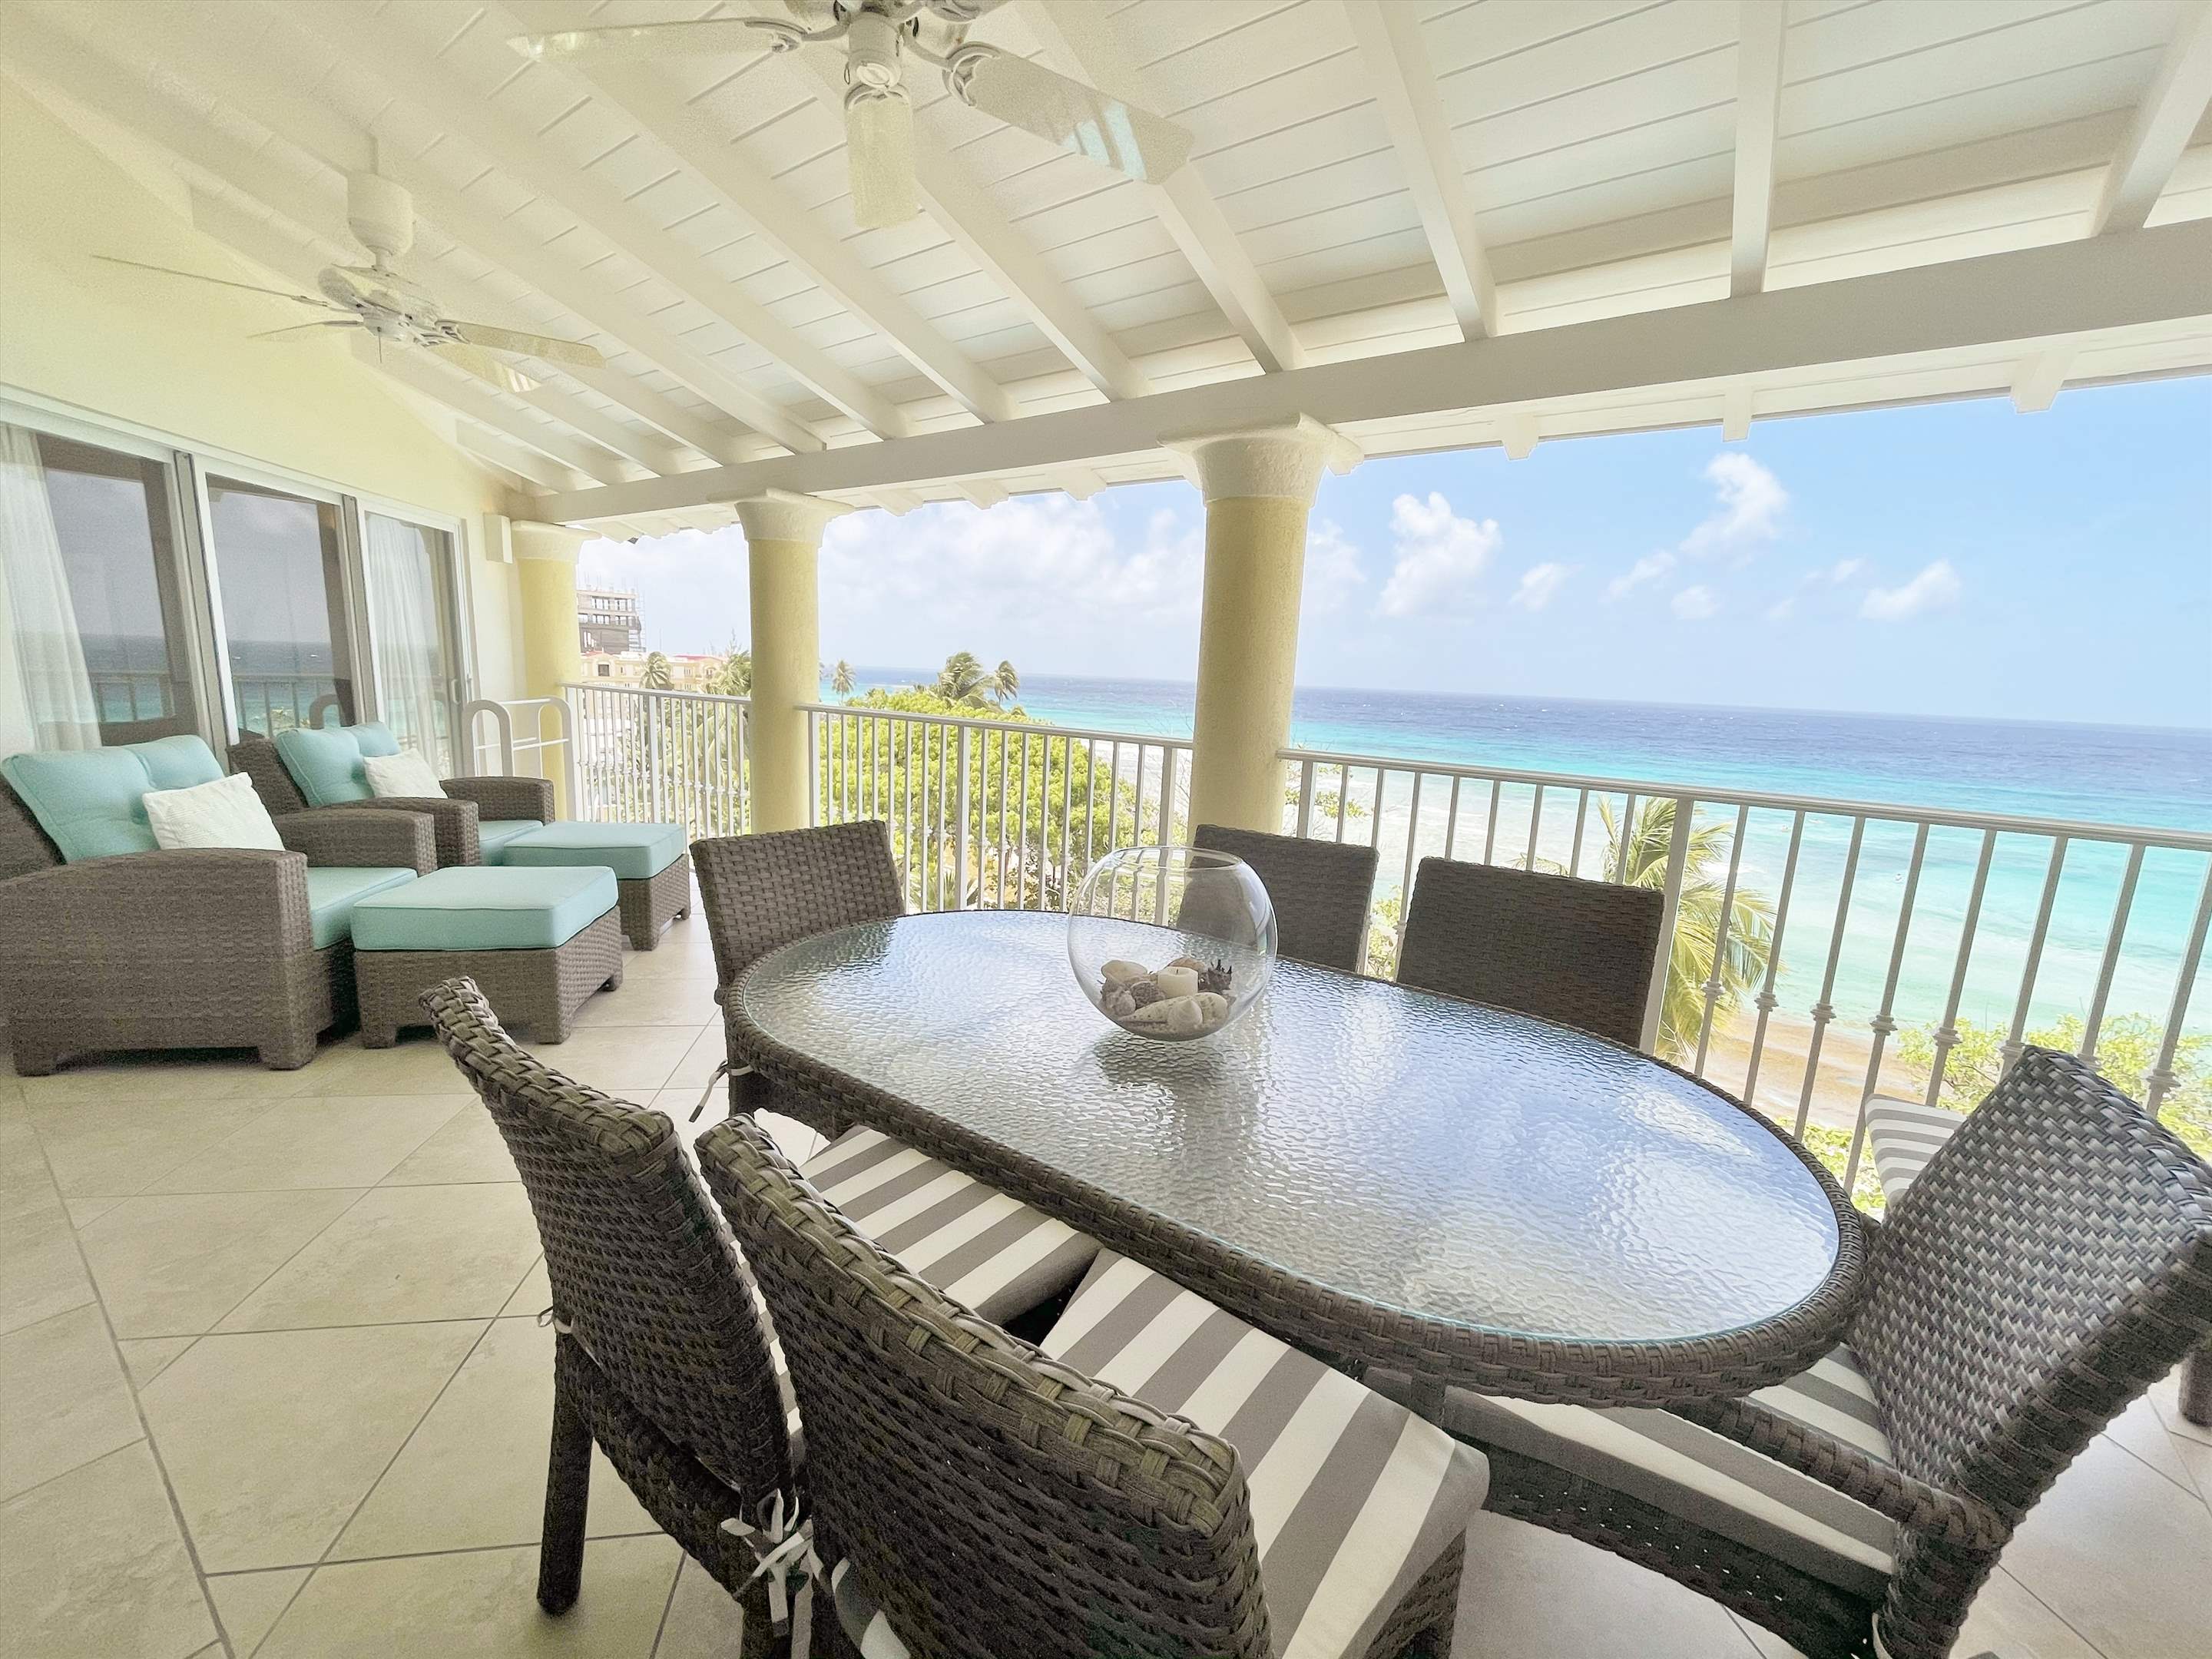 Sapphire Beach 505 , 3 Bedroom , 3 bedroom apartment in St. Lawrence Gap & South Coast, Barbados Photo #9